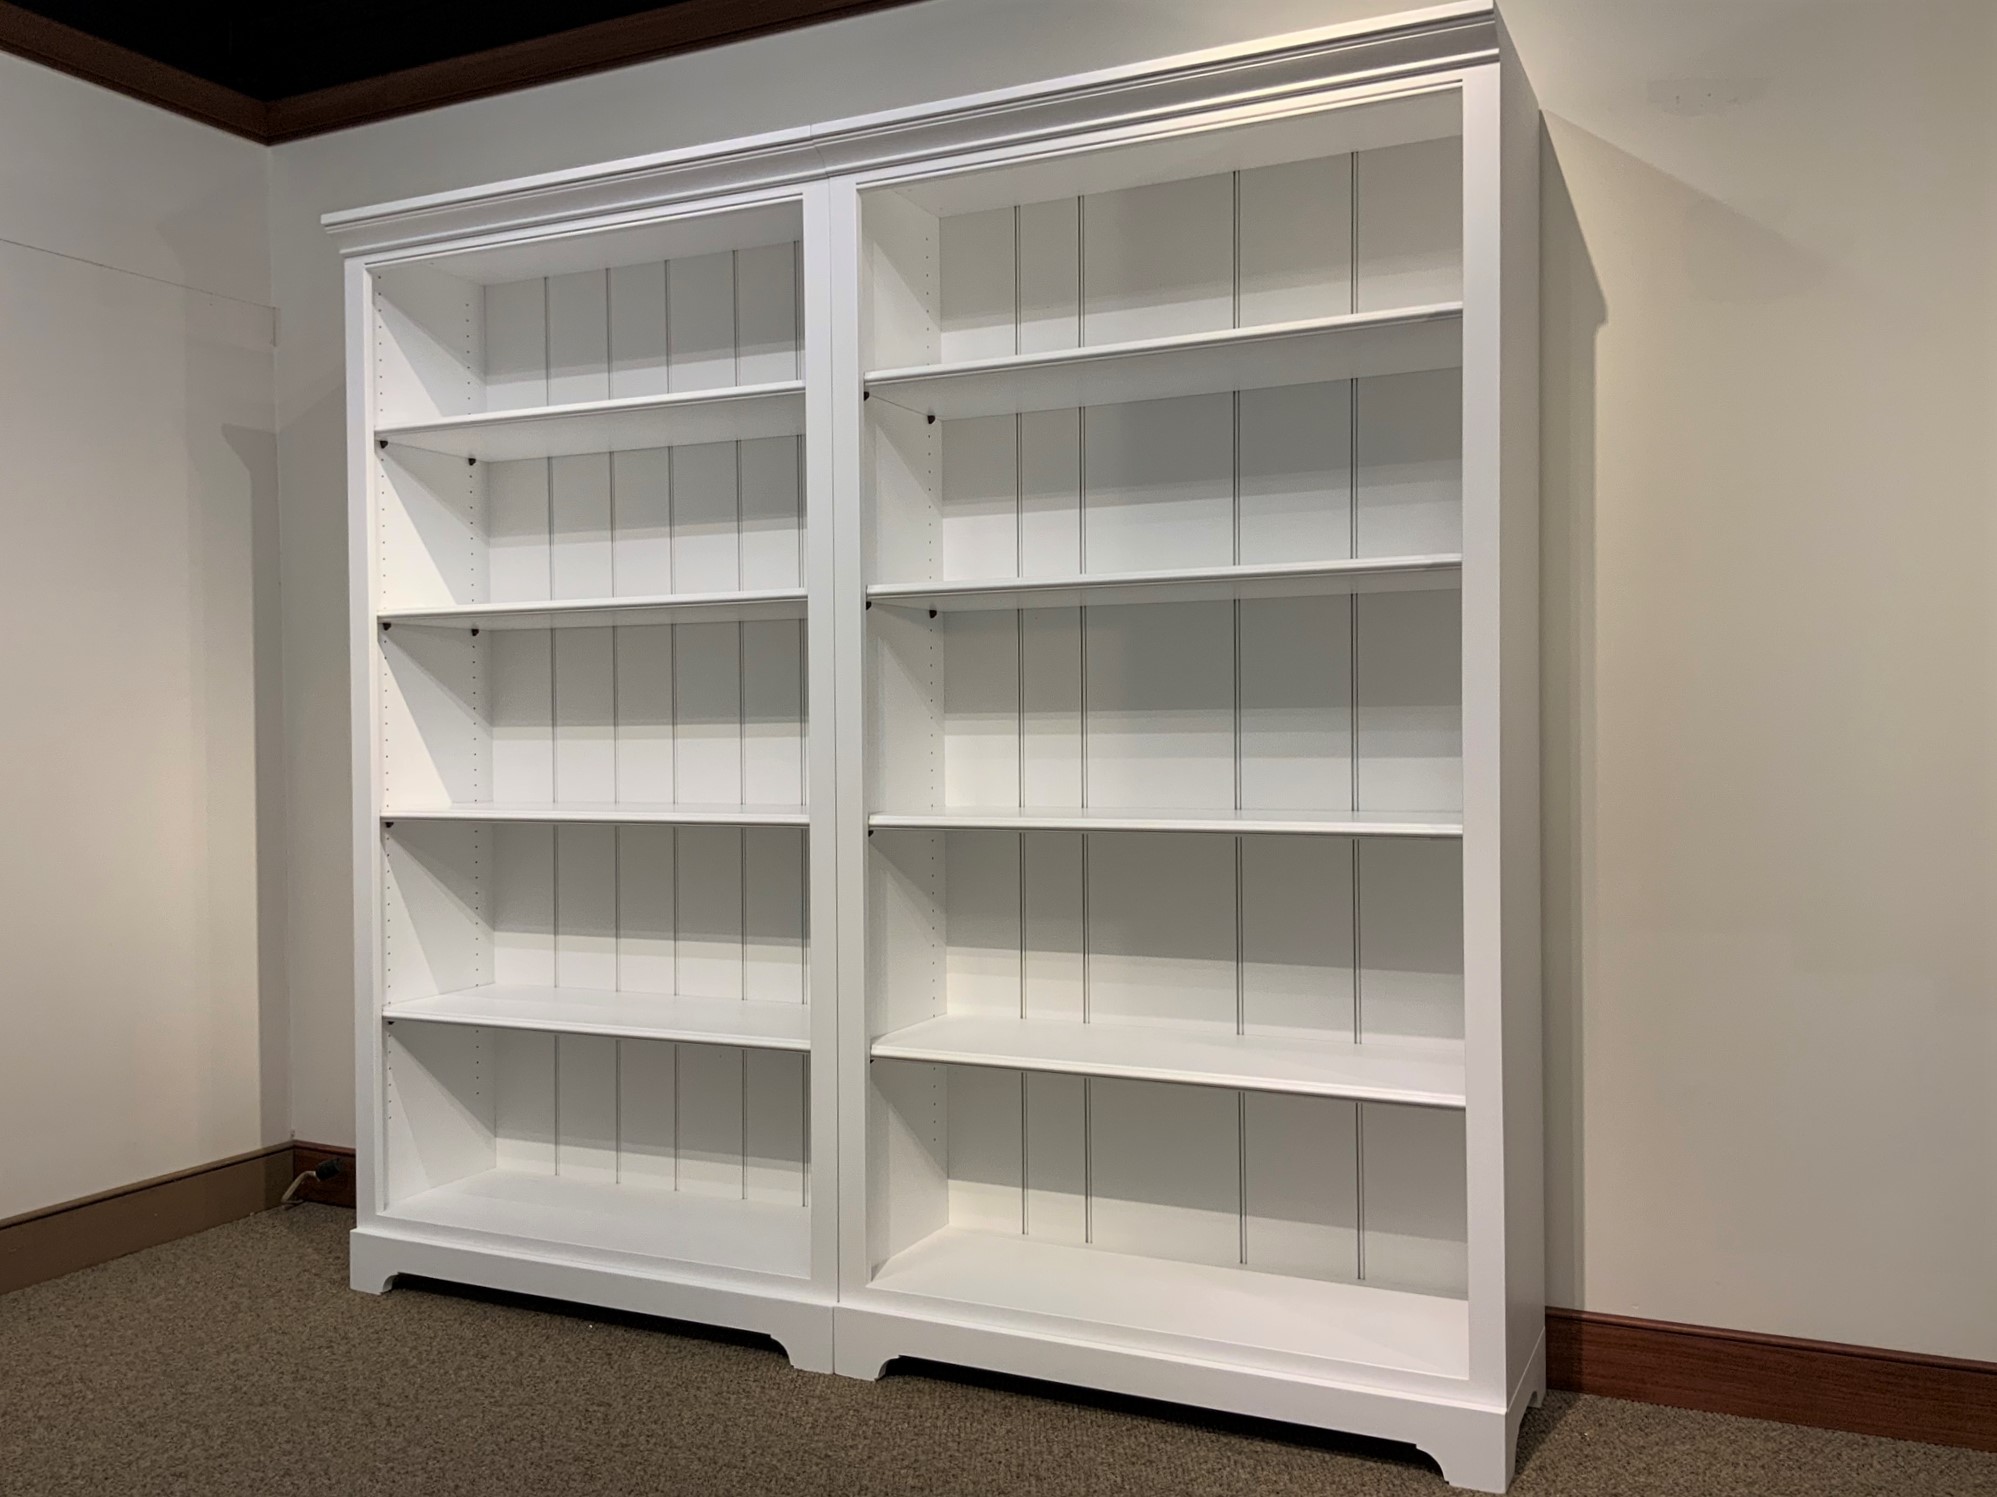 Shaker Bookcases Home Library, 9 Foot High Bookcases